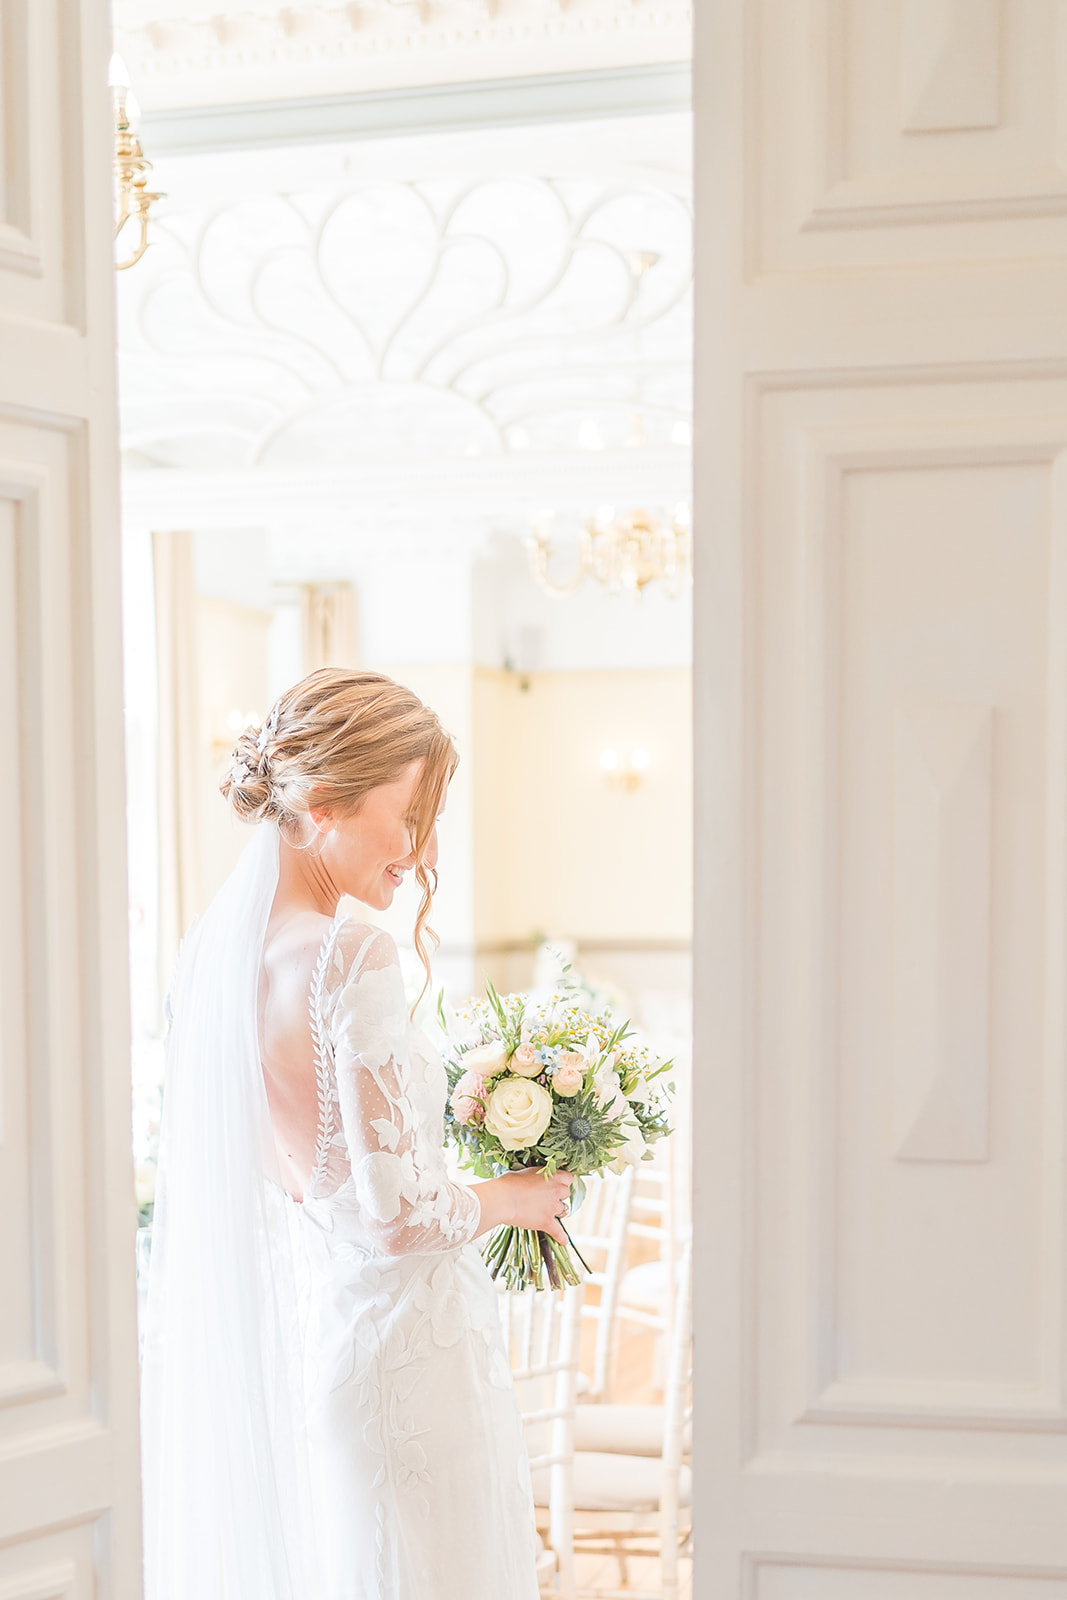 caught glimpse of bride through doorway in Nunsmere hall wedding photography 